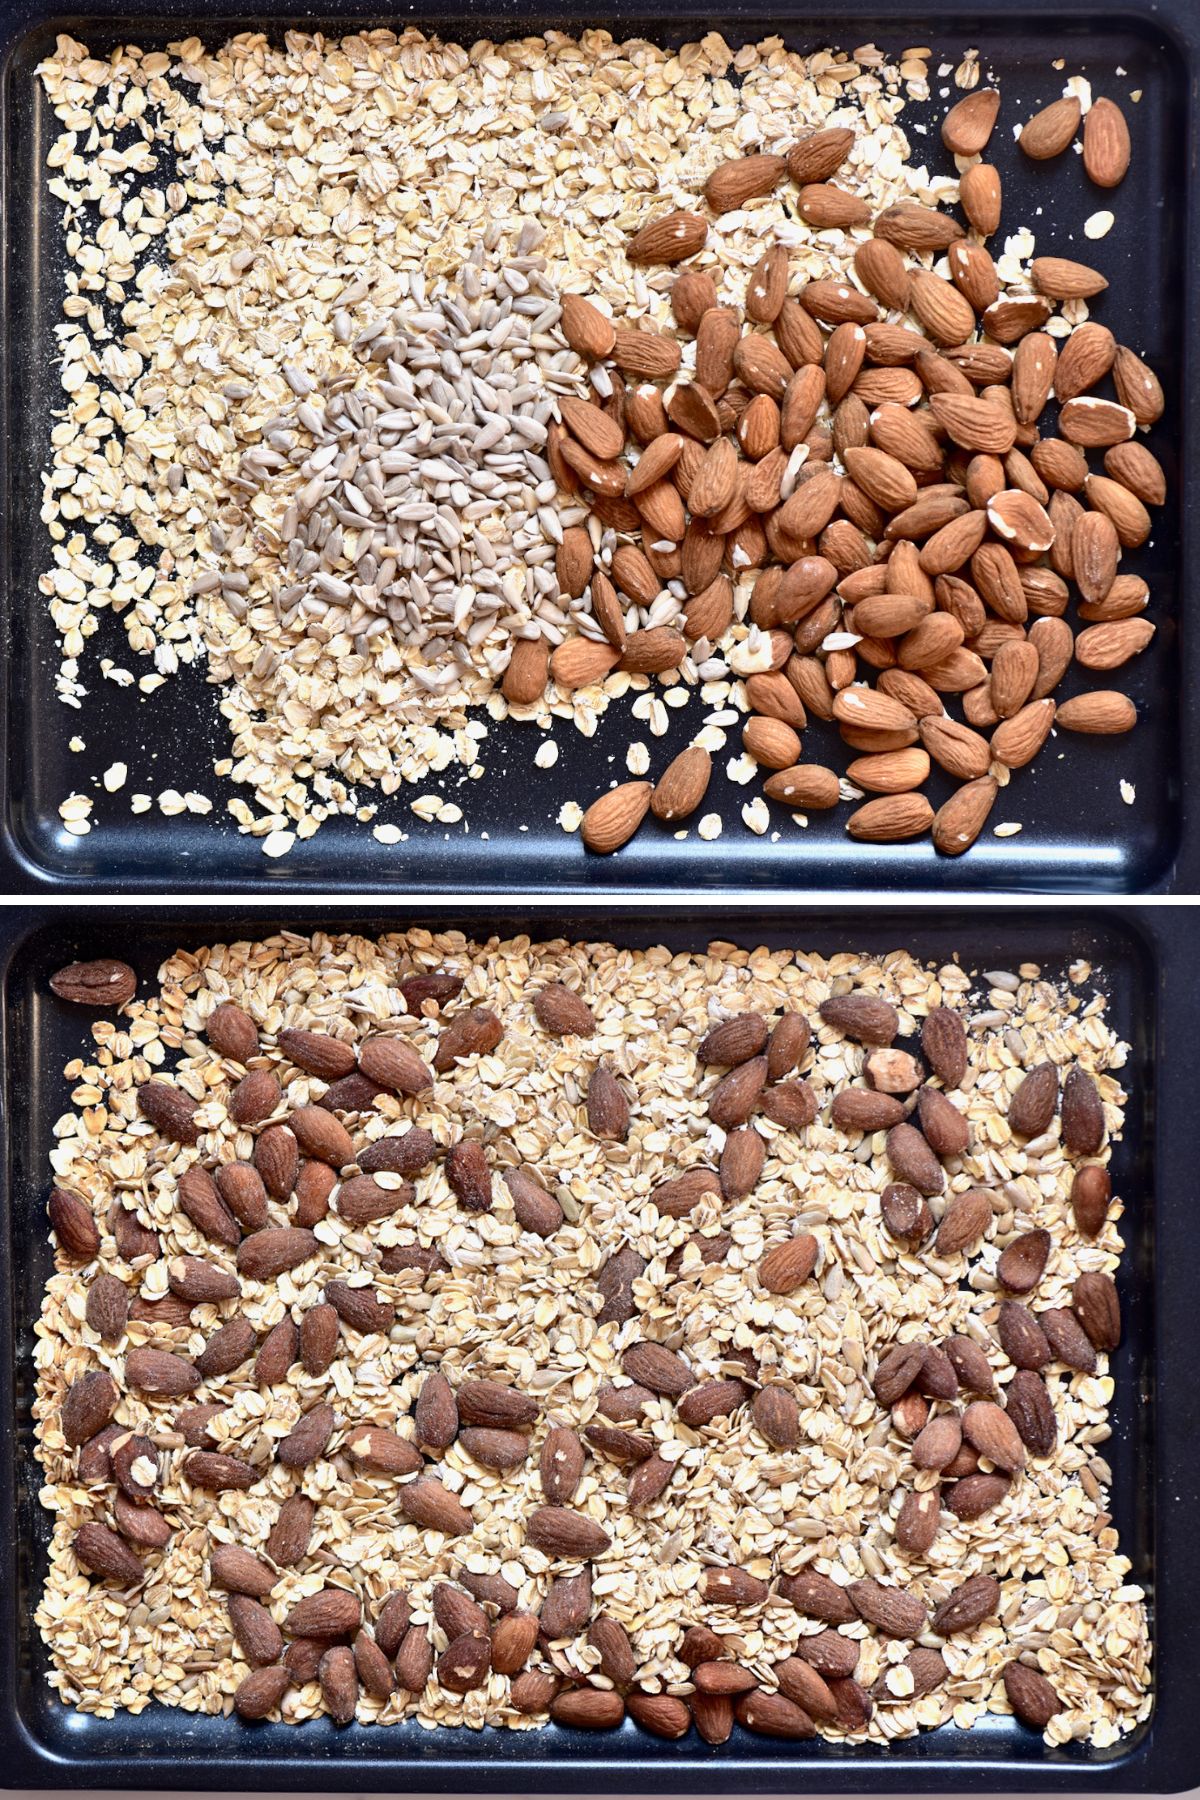 Before and after toasting oats almonds and sunflower seeds